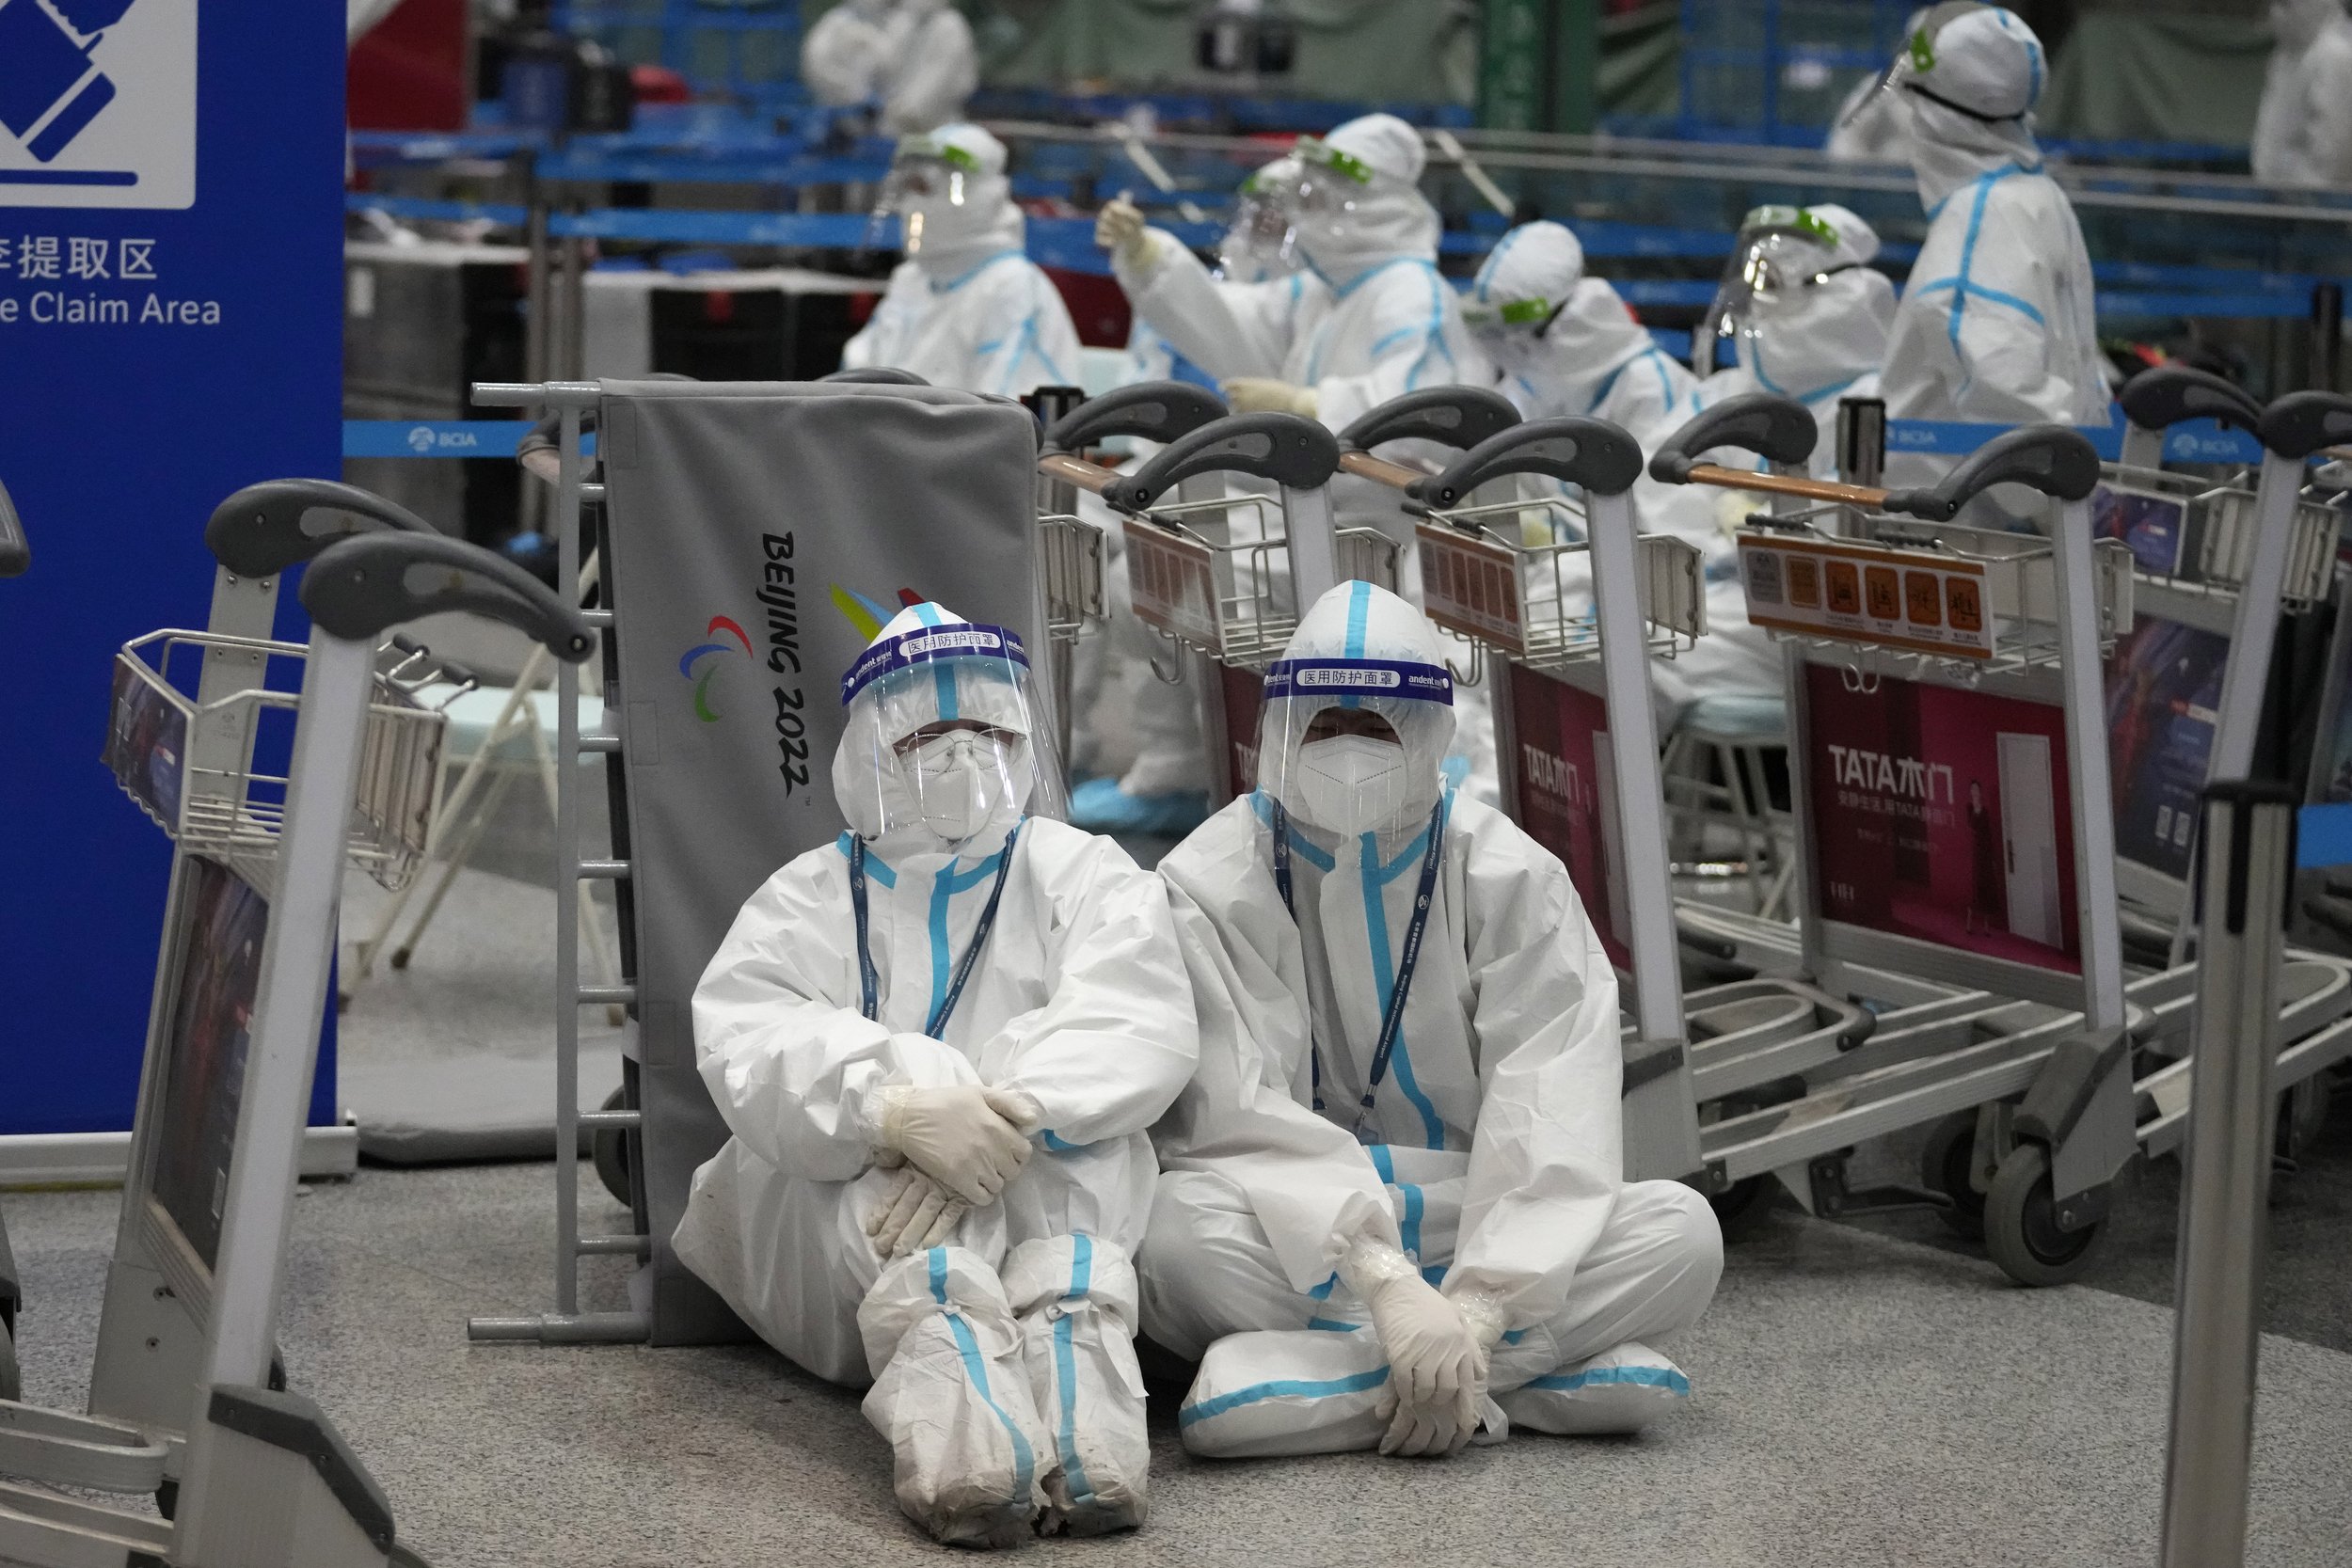  Olympic workers in protective clothing rest after they helped travelers at the Beijing Capital International airport after the 2022 Winter Olympics, Monday, Feb. 21, 2022, in Beijing, China. (AP Photo/Frank Augstein) 